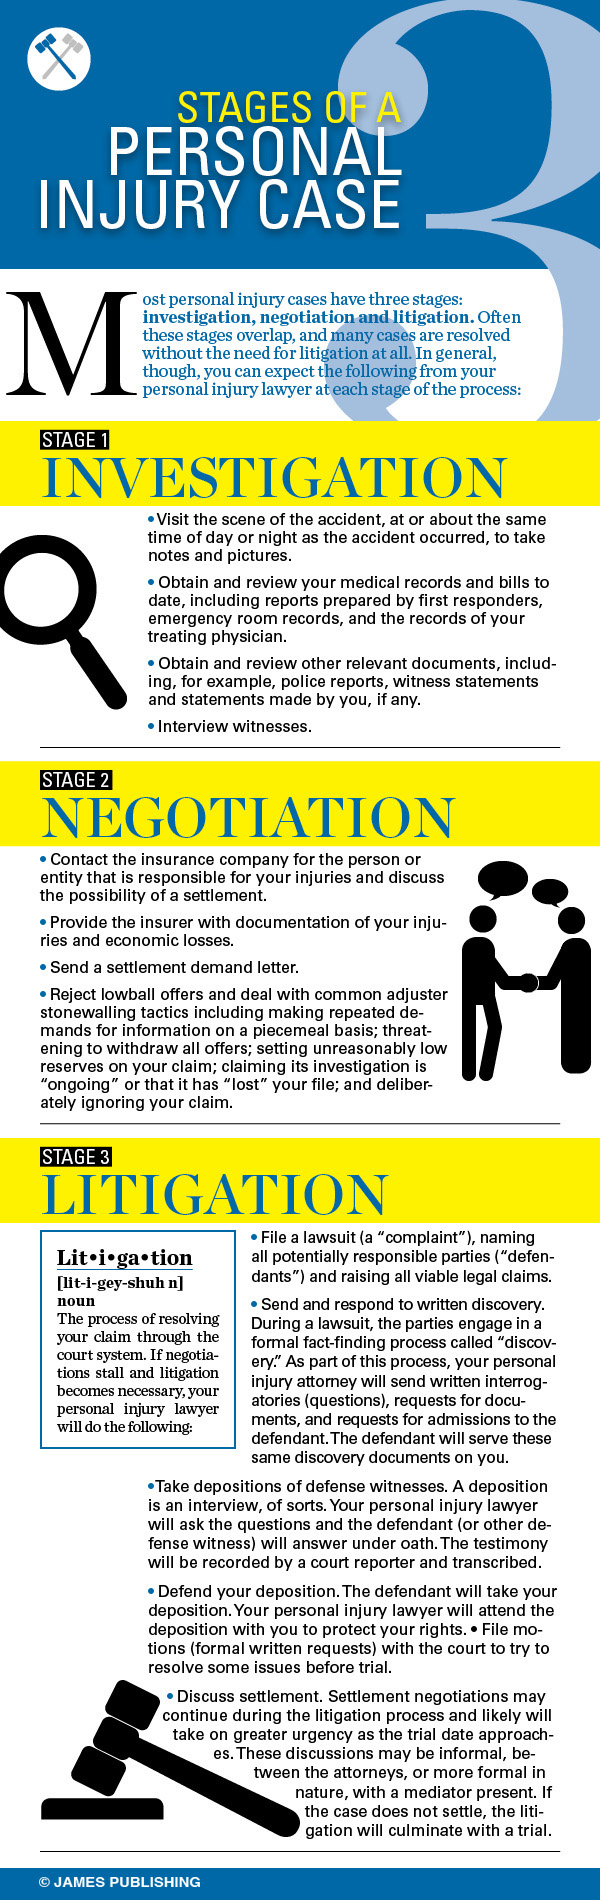 Stages of a Personal Injury Case Infographic